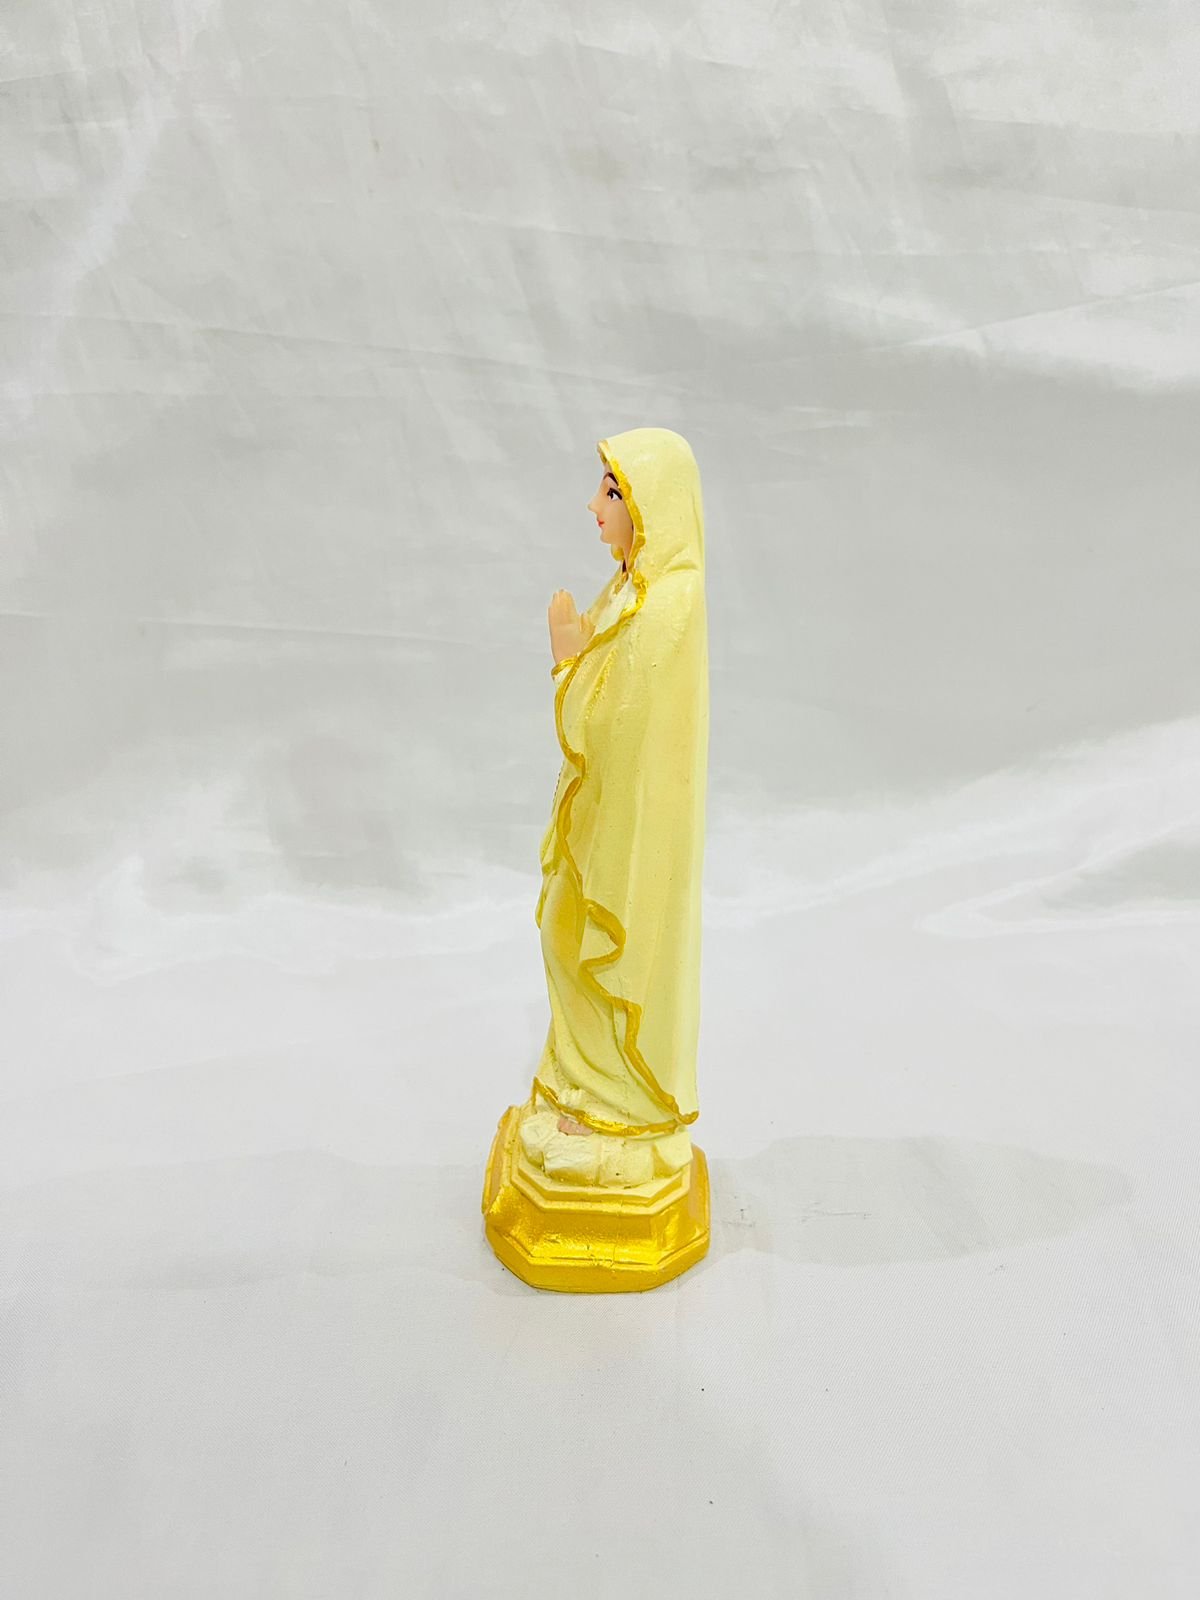 11 Inch Poly Marble Our Lady Of Lourdes Statue